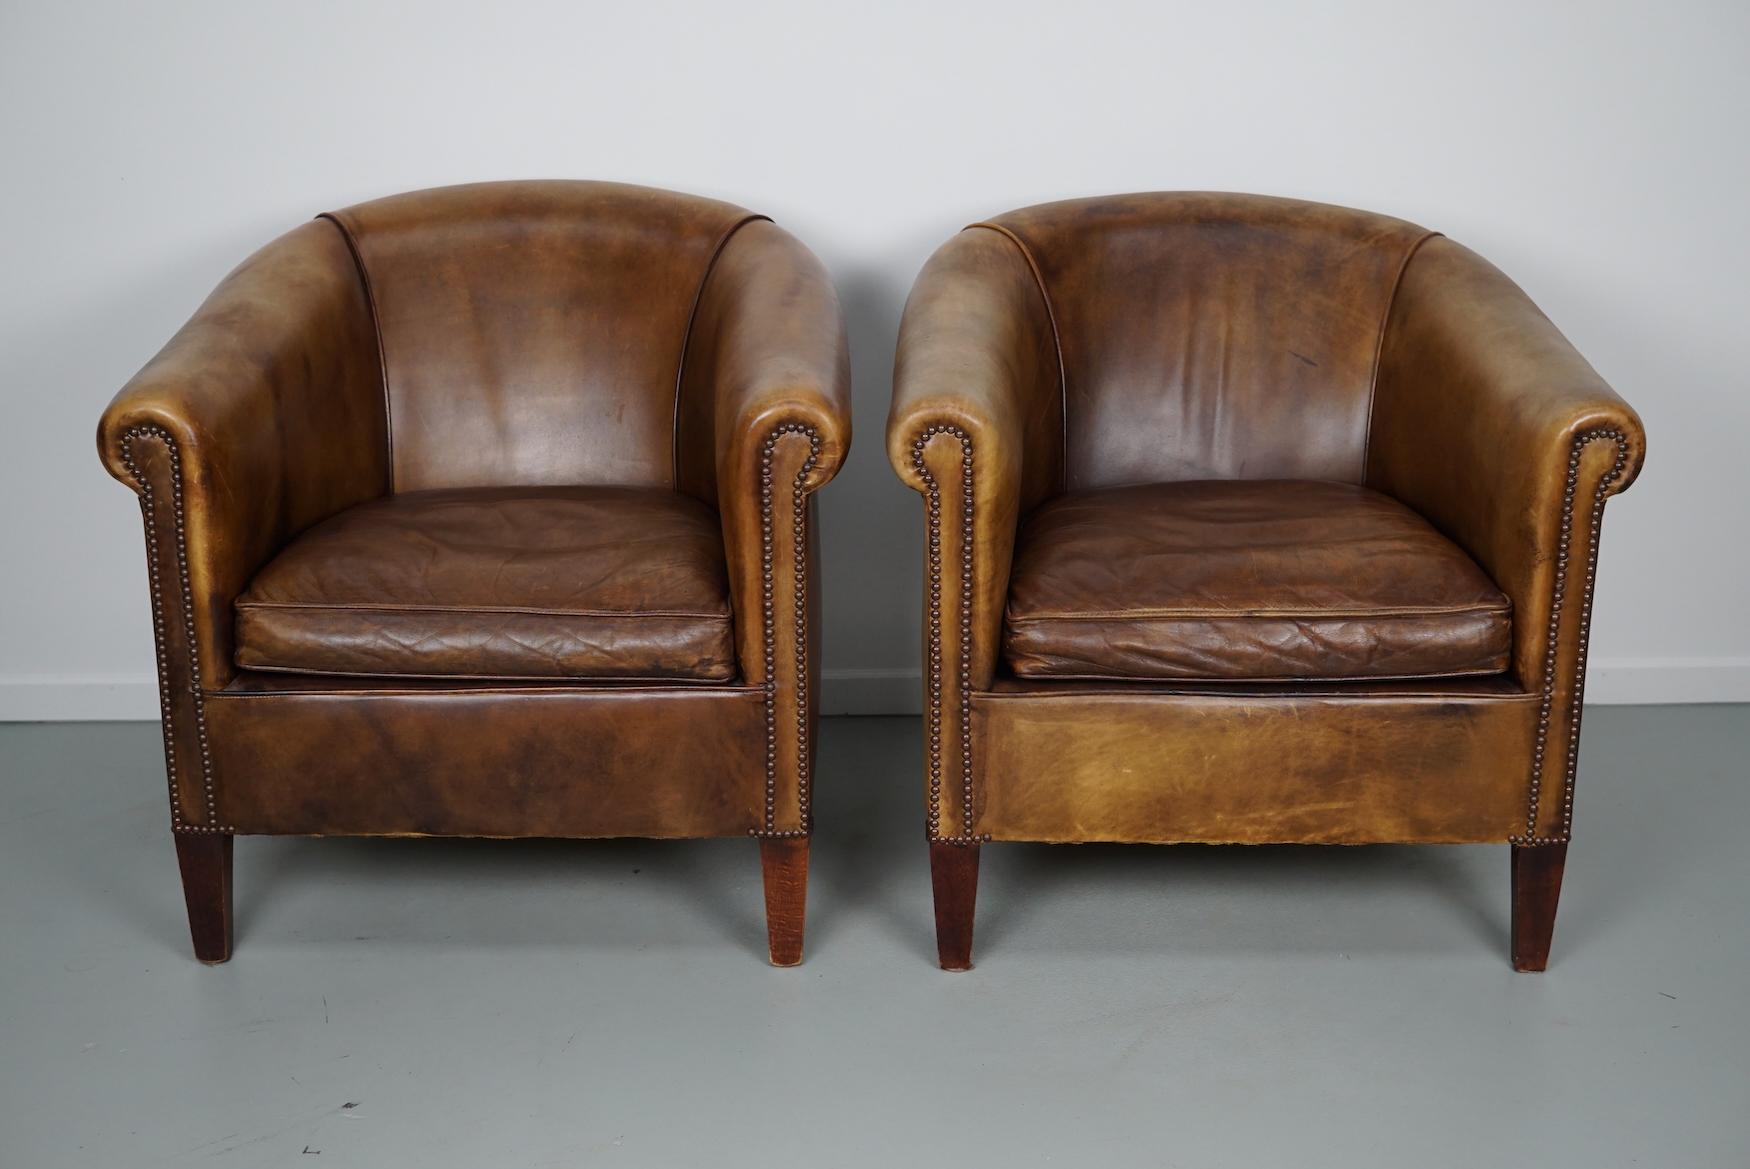 Industrial Vintage Dutch Cognac / Brown Colored Leather Club Chair, Set of 2